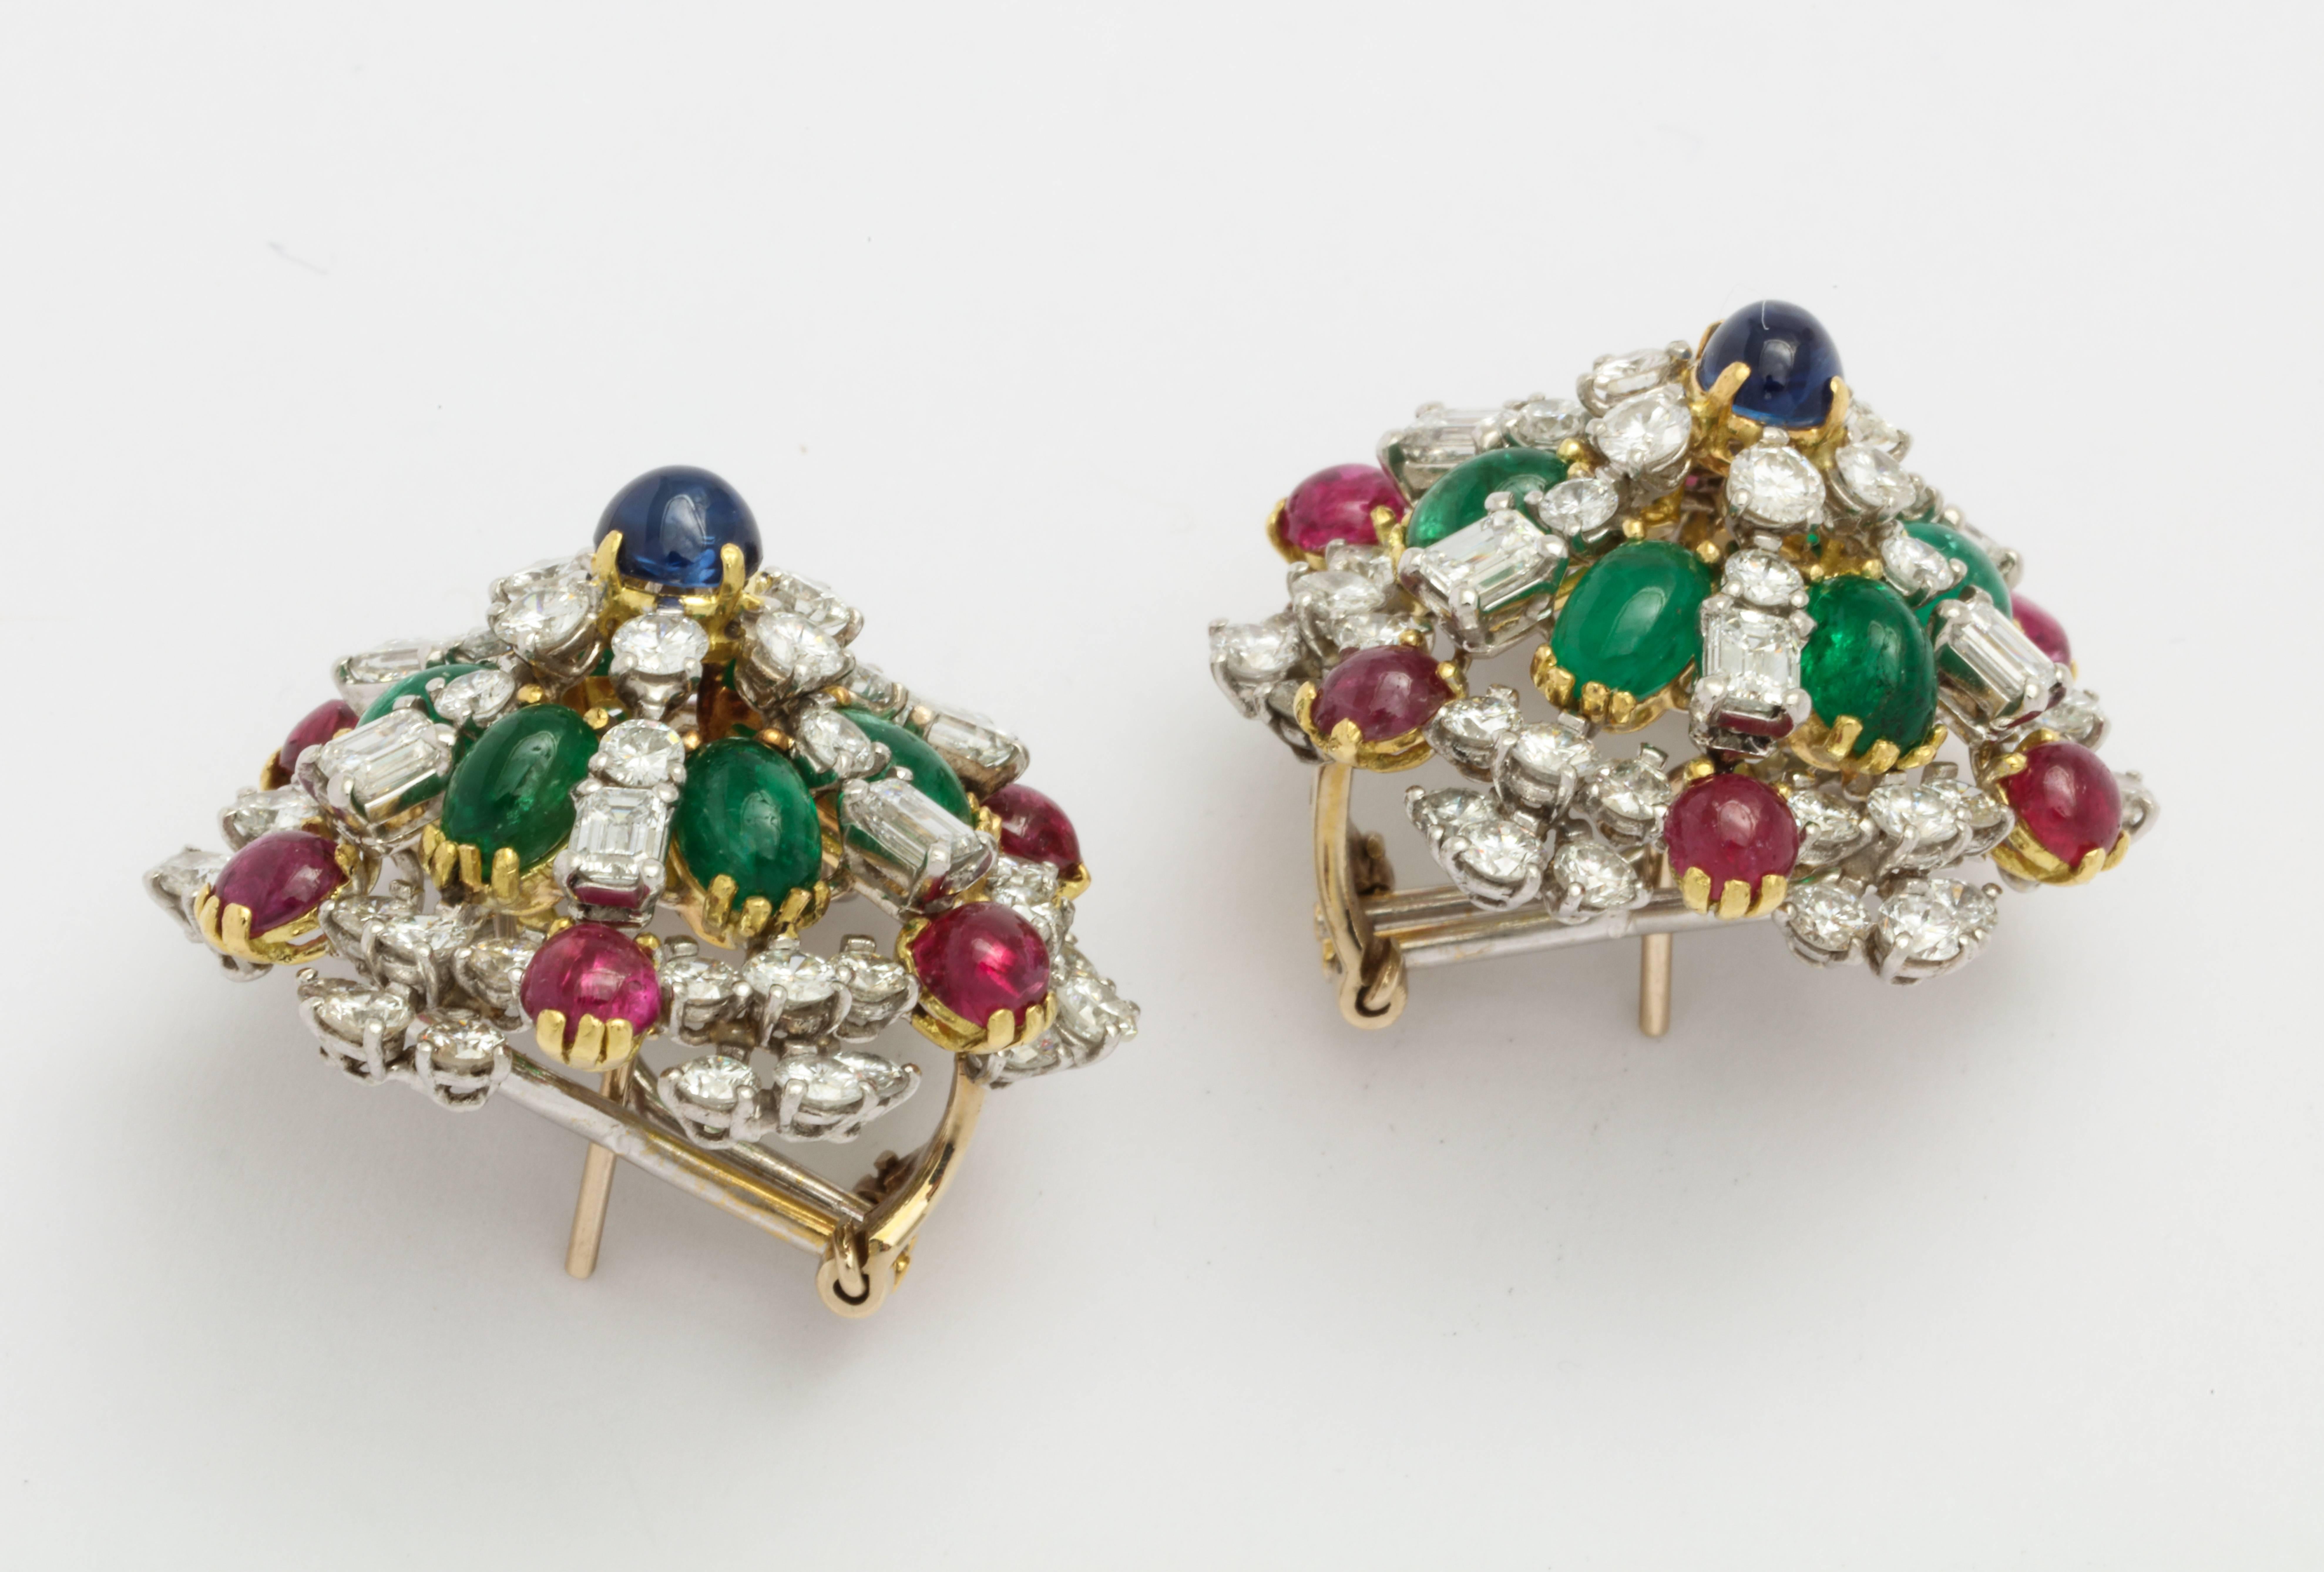 An impressive pair of clip on earrings featuring cabochon rubies, sapphires and emeralds and both round brilliant and emerald cut diamonds. Set in platinum and 18 karat yellow gold. Circa 1960s, with French import and export marks. 
Rubies: 4.08